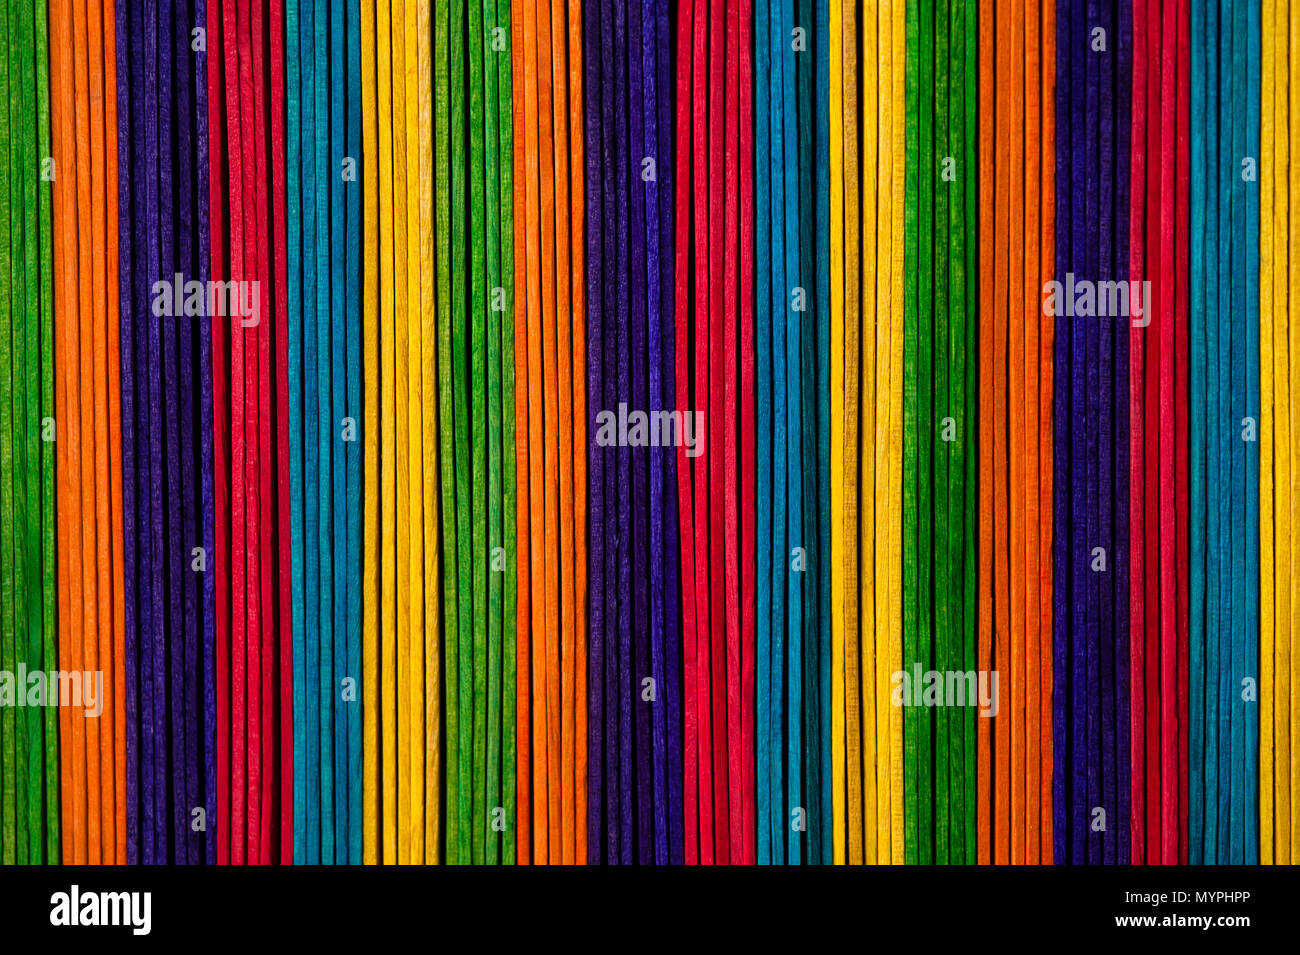 Colorful Scattered Wooden Multicolored Popsicle Sticks Stock Photo